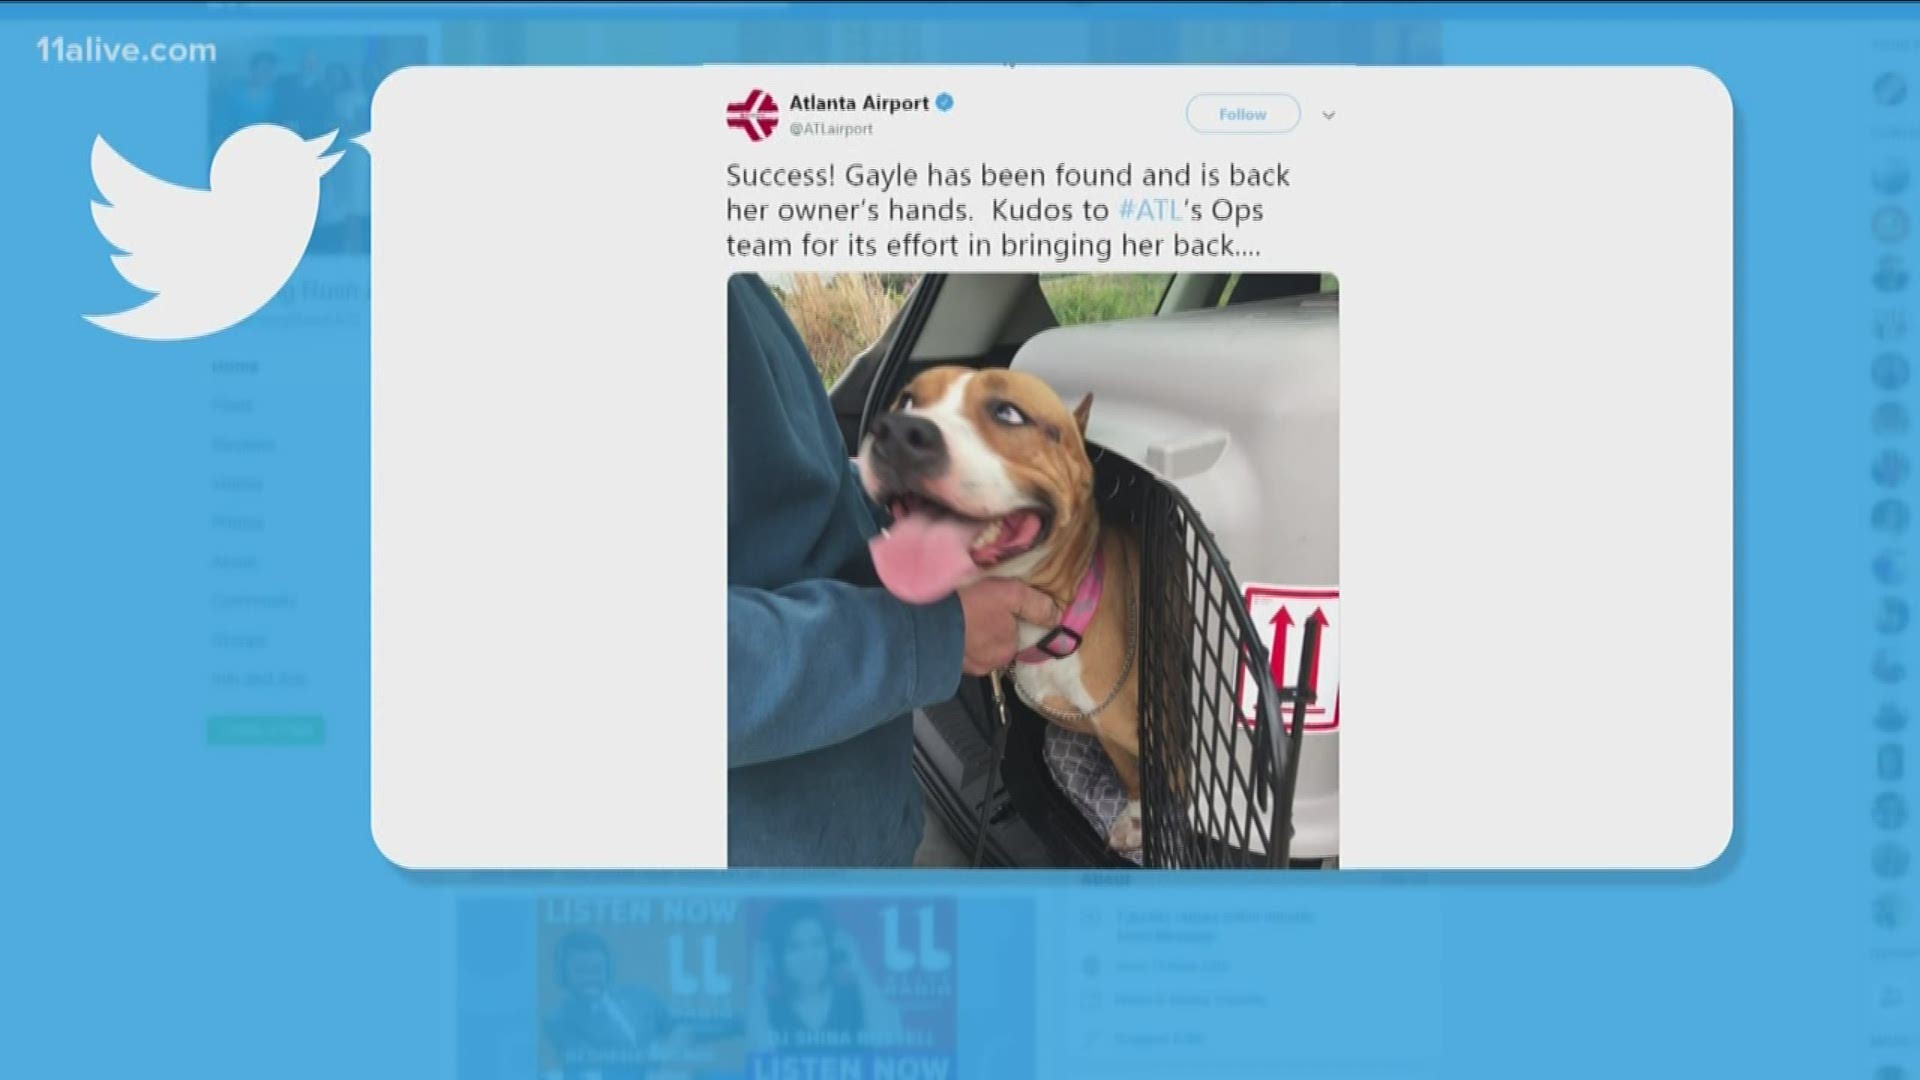 The Atlanta airport tweeted that Gale is back in her owner's hands.